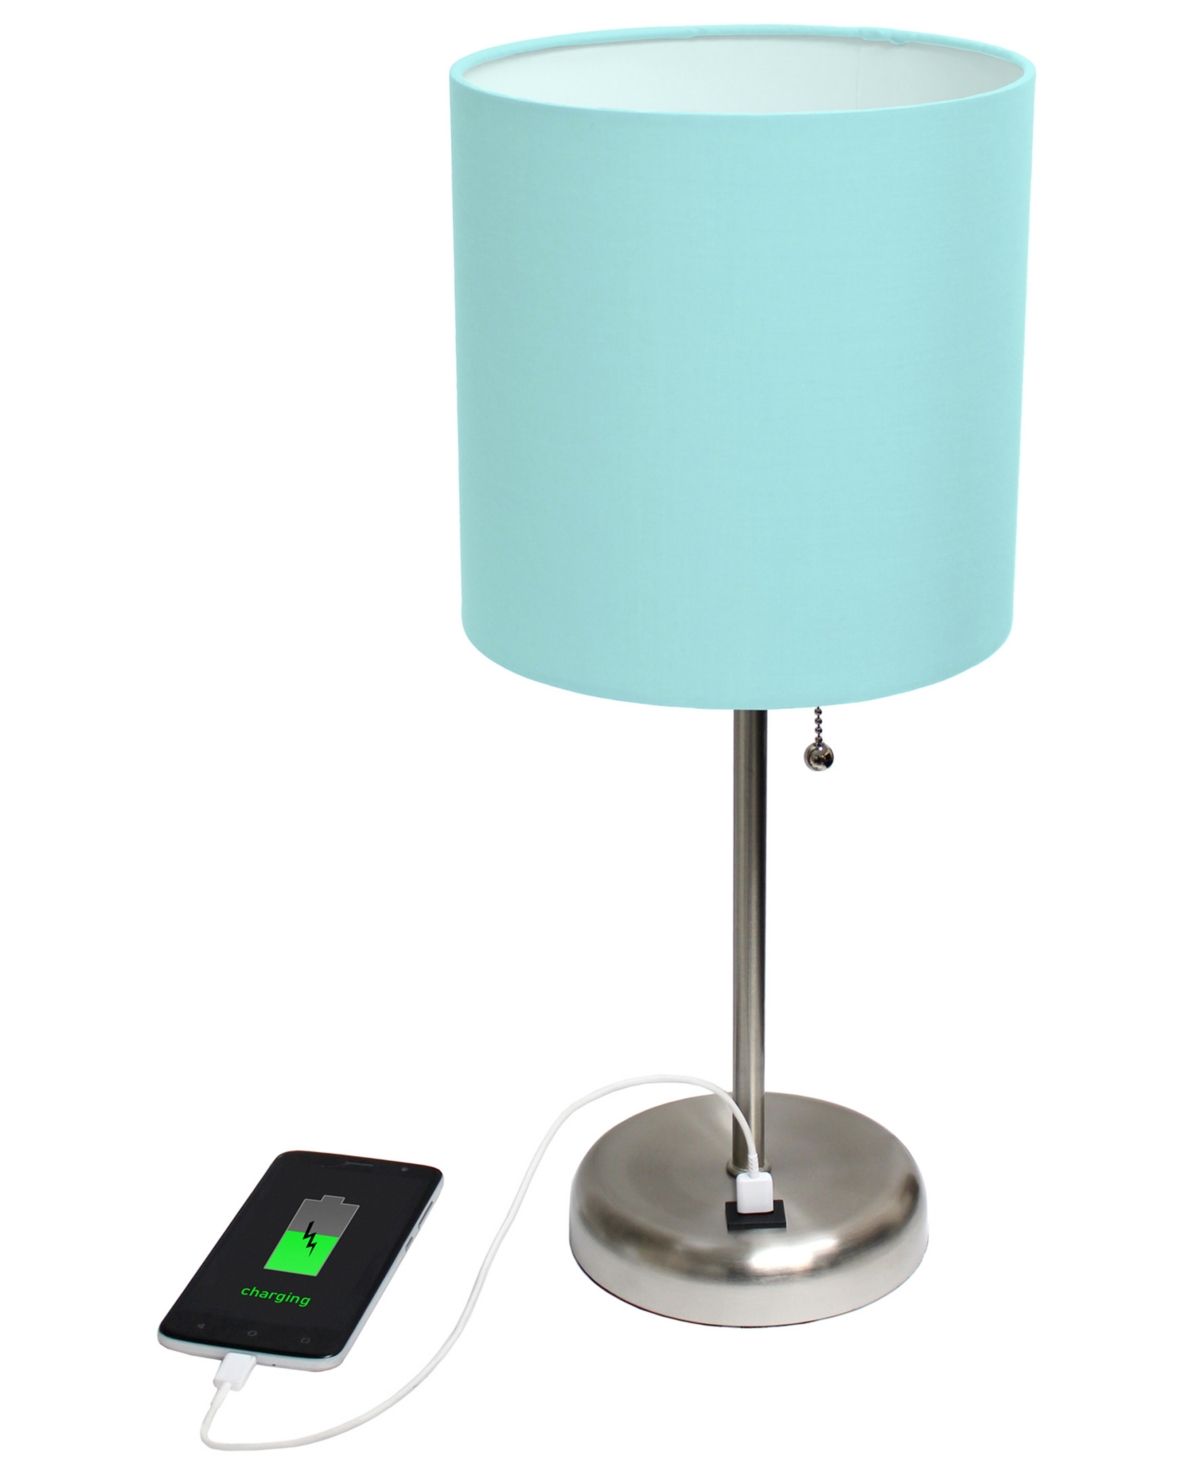 Shop Creekwood Home Oslo 19.5" Contemporary Bedside Usb Port Feature Standard Metal Table Desk Lamp In Br.steel,teal Shade